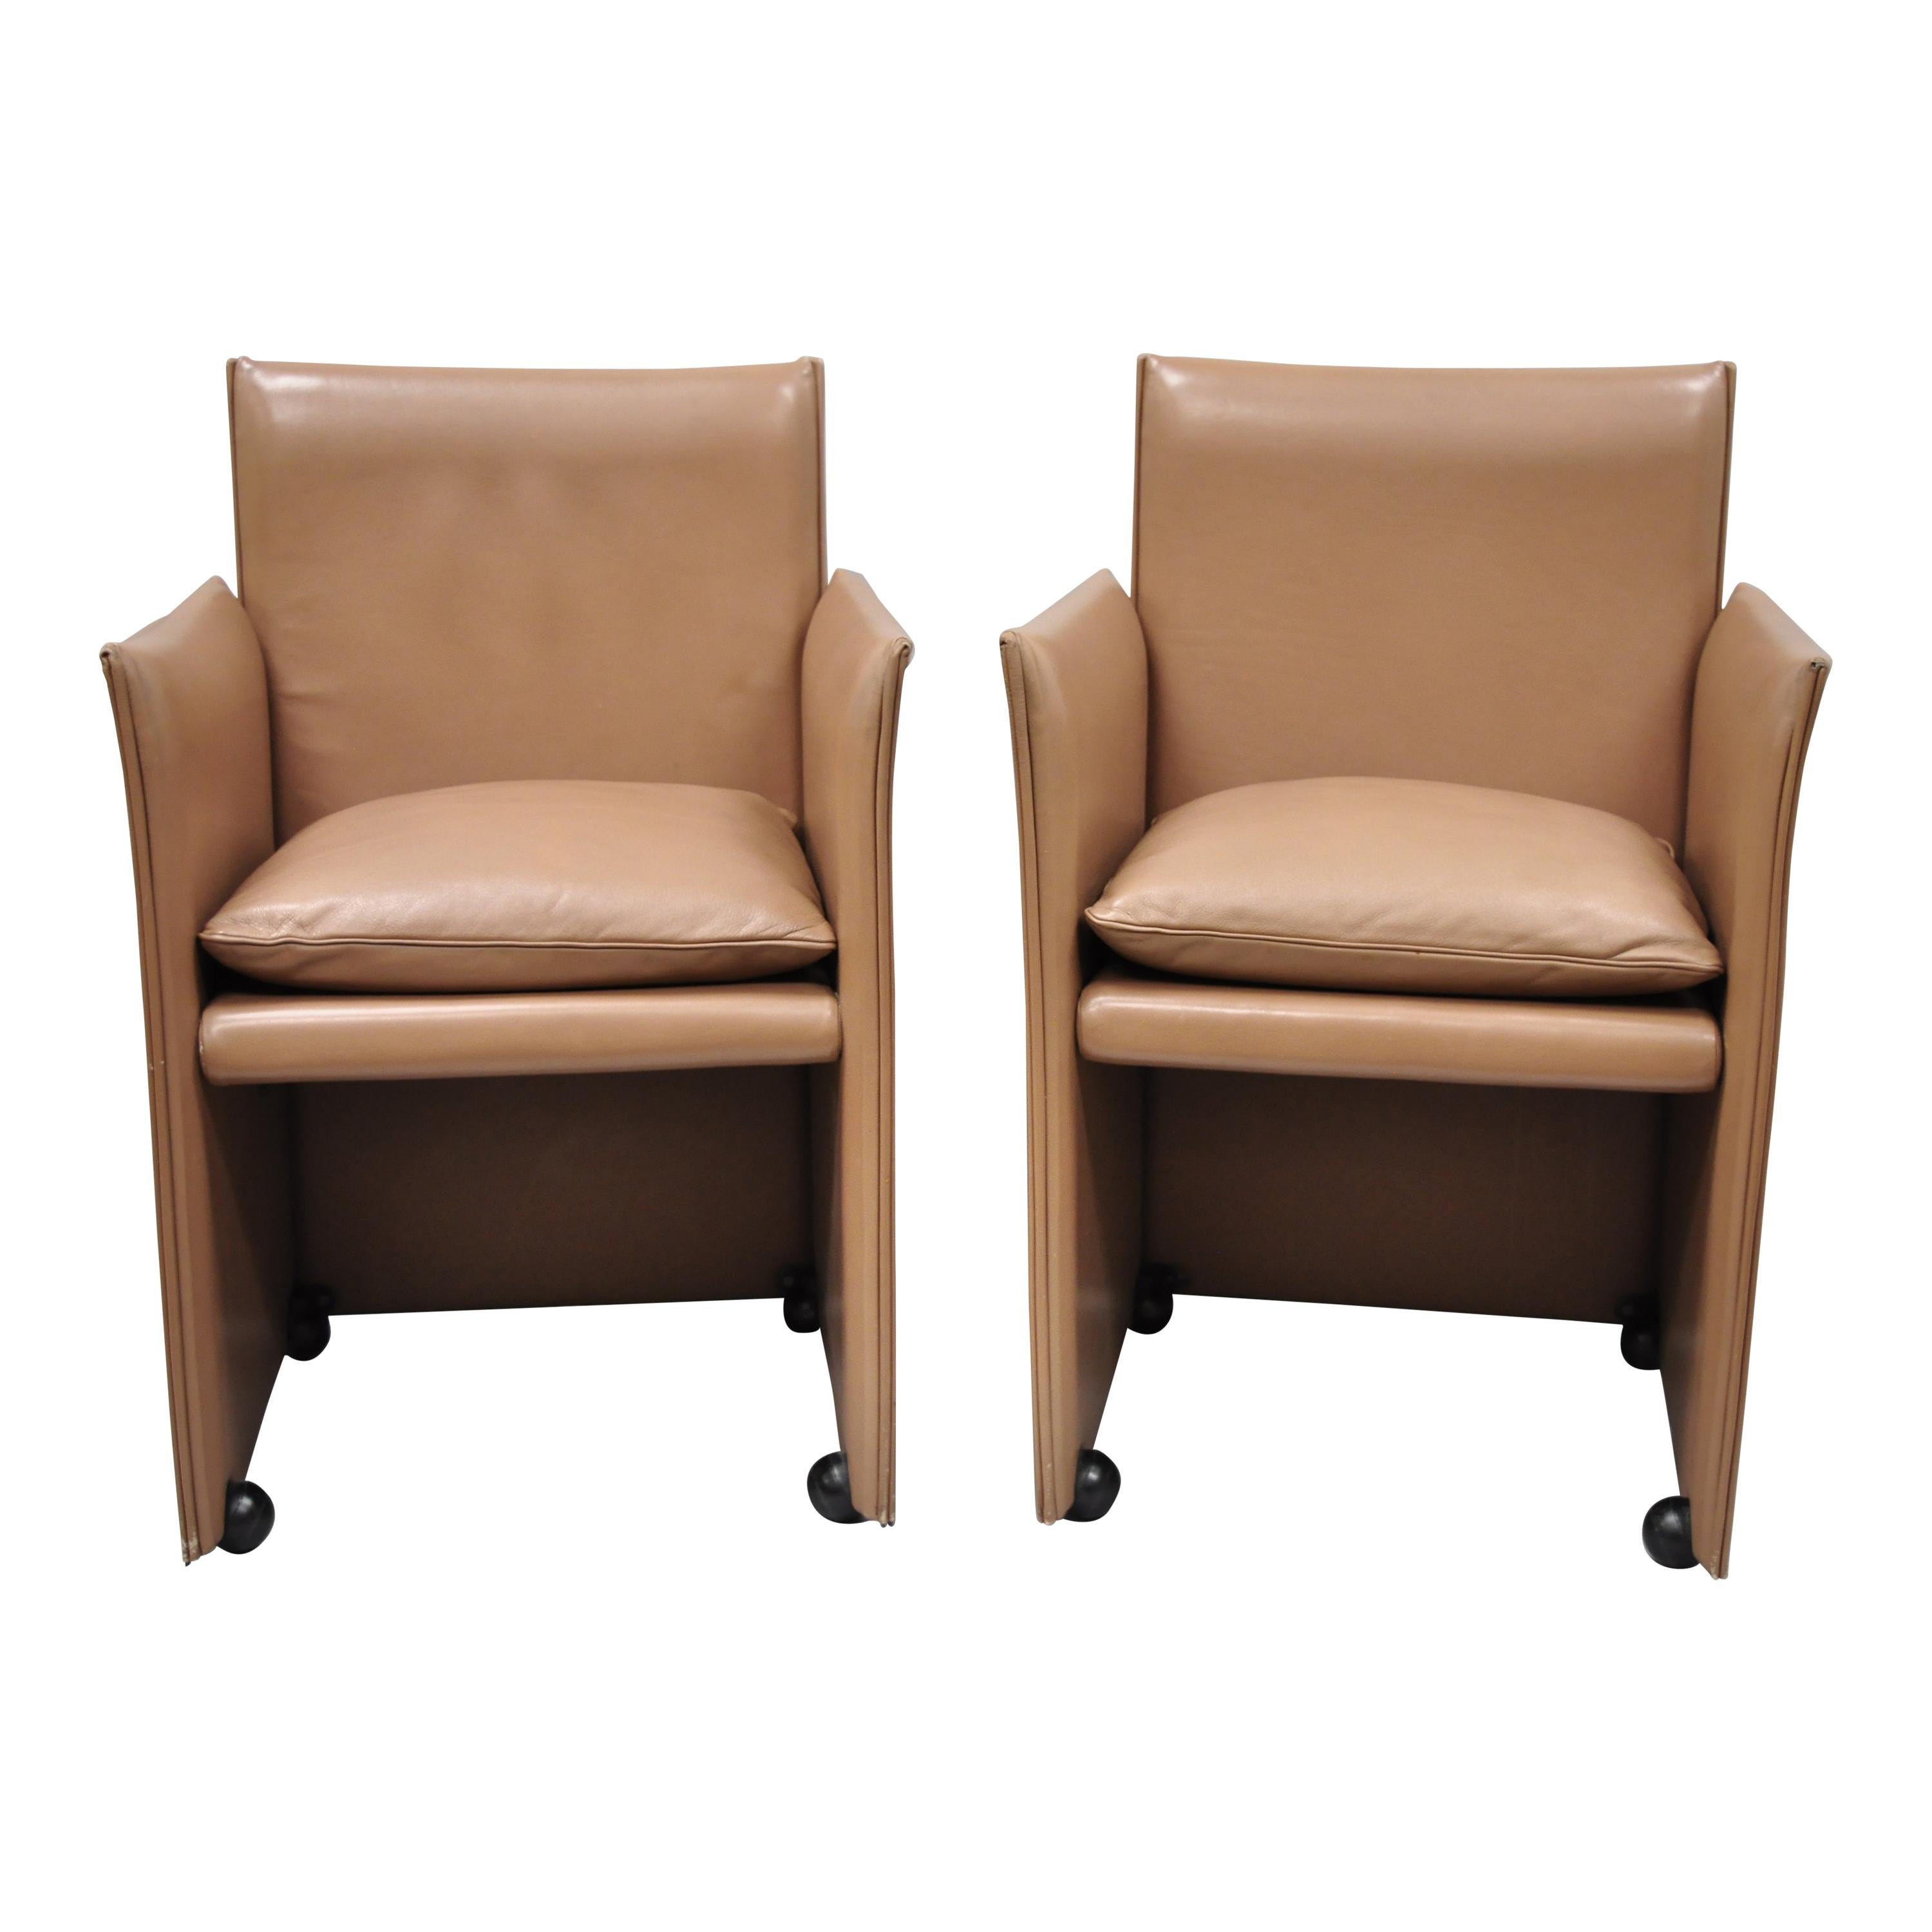 Pair of 401 Break Armchair by Mario Bellini for Cassina Copper Leather